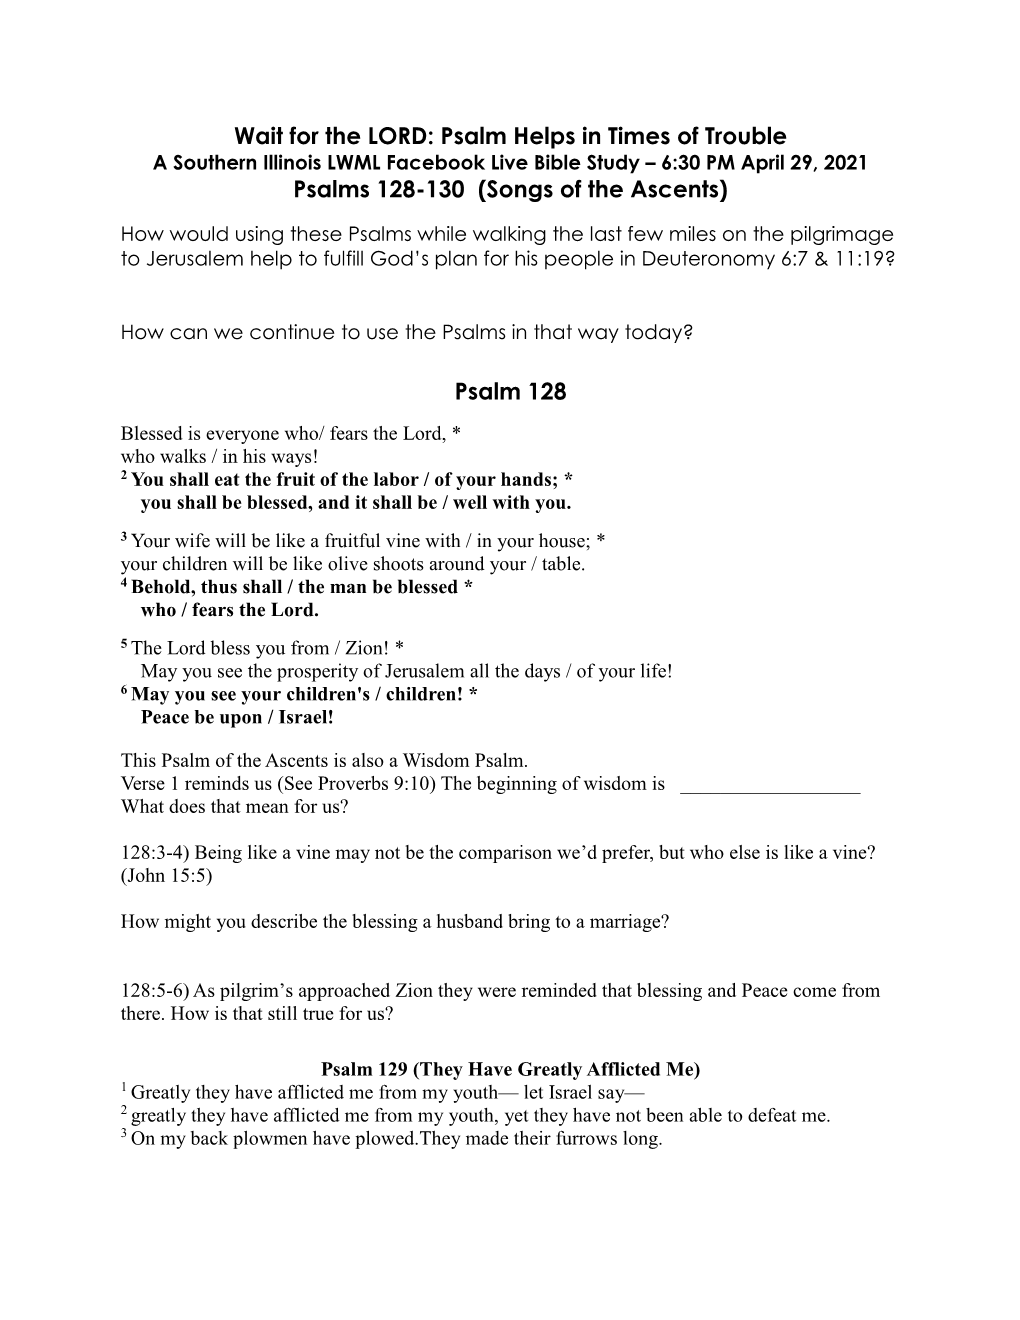 Wait for the LORD: Psalm Helps in Times of Trouble Psalms 128-130